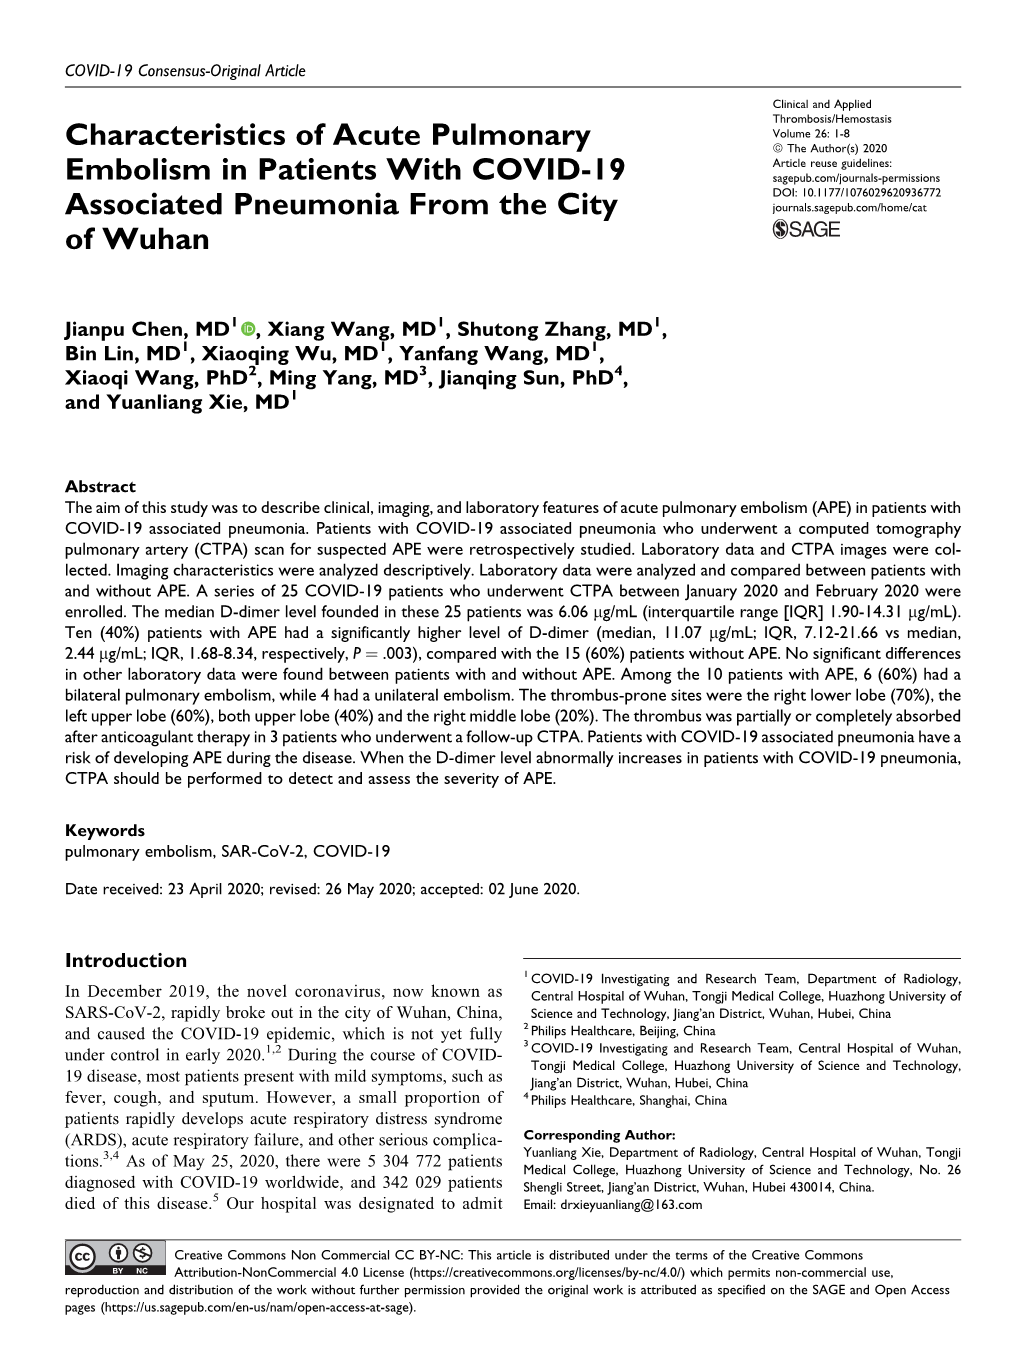 Characteristics of Acute Pulmonary Embolism in Patients with COVID-19 Associated Pneumonia from the City of Wuhan